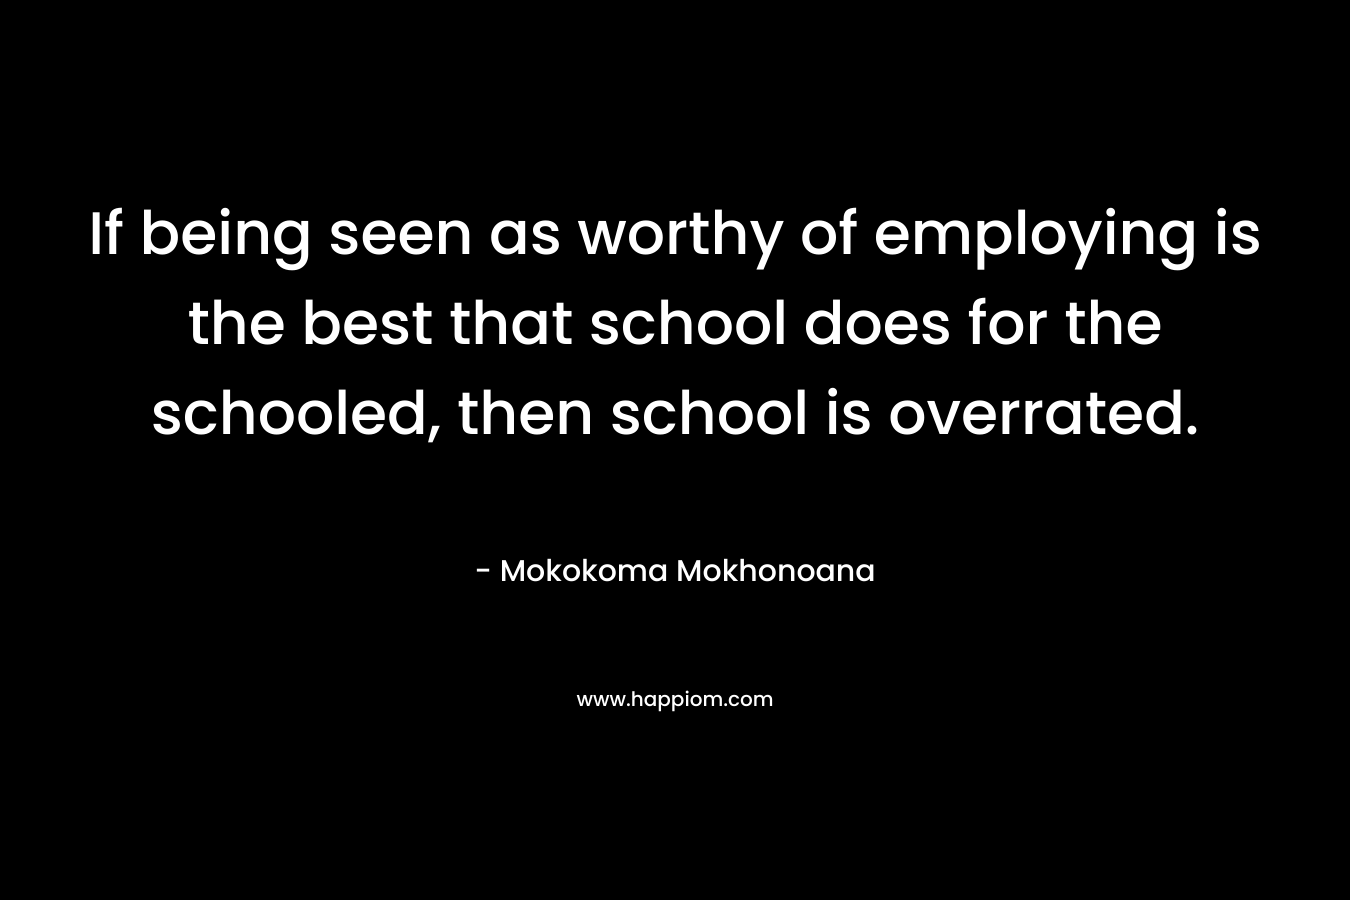 If being seen as worthy of employing is the best that school does for the schooled, then school is overrated.